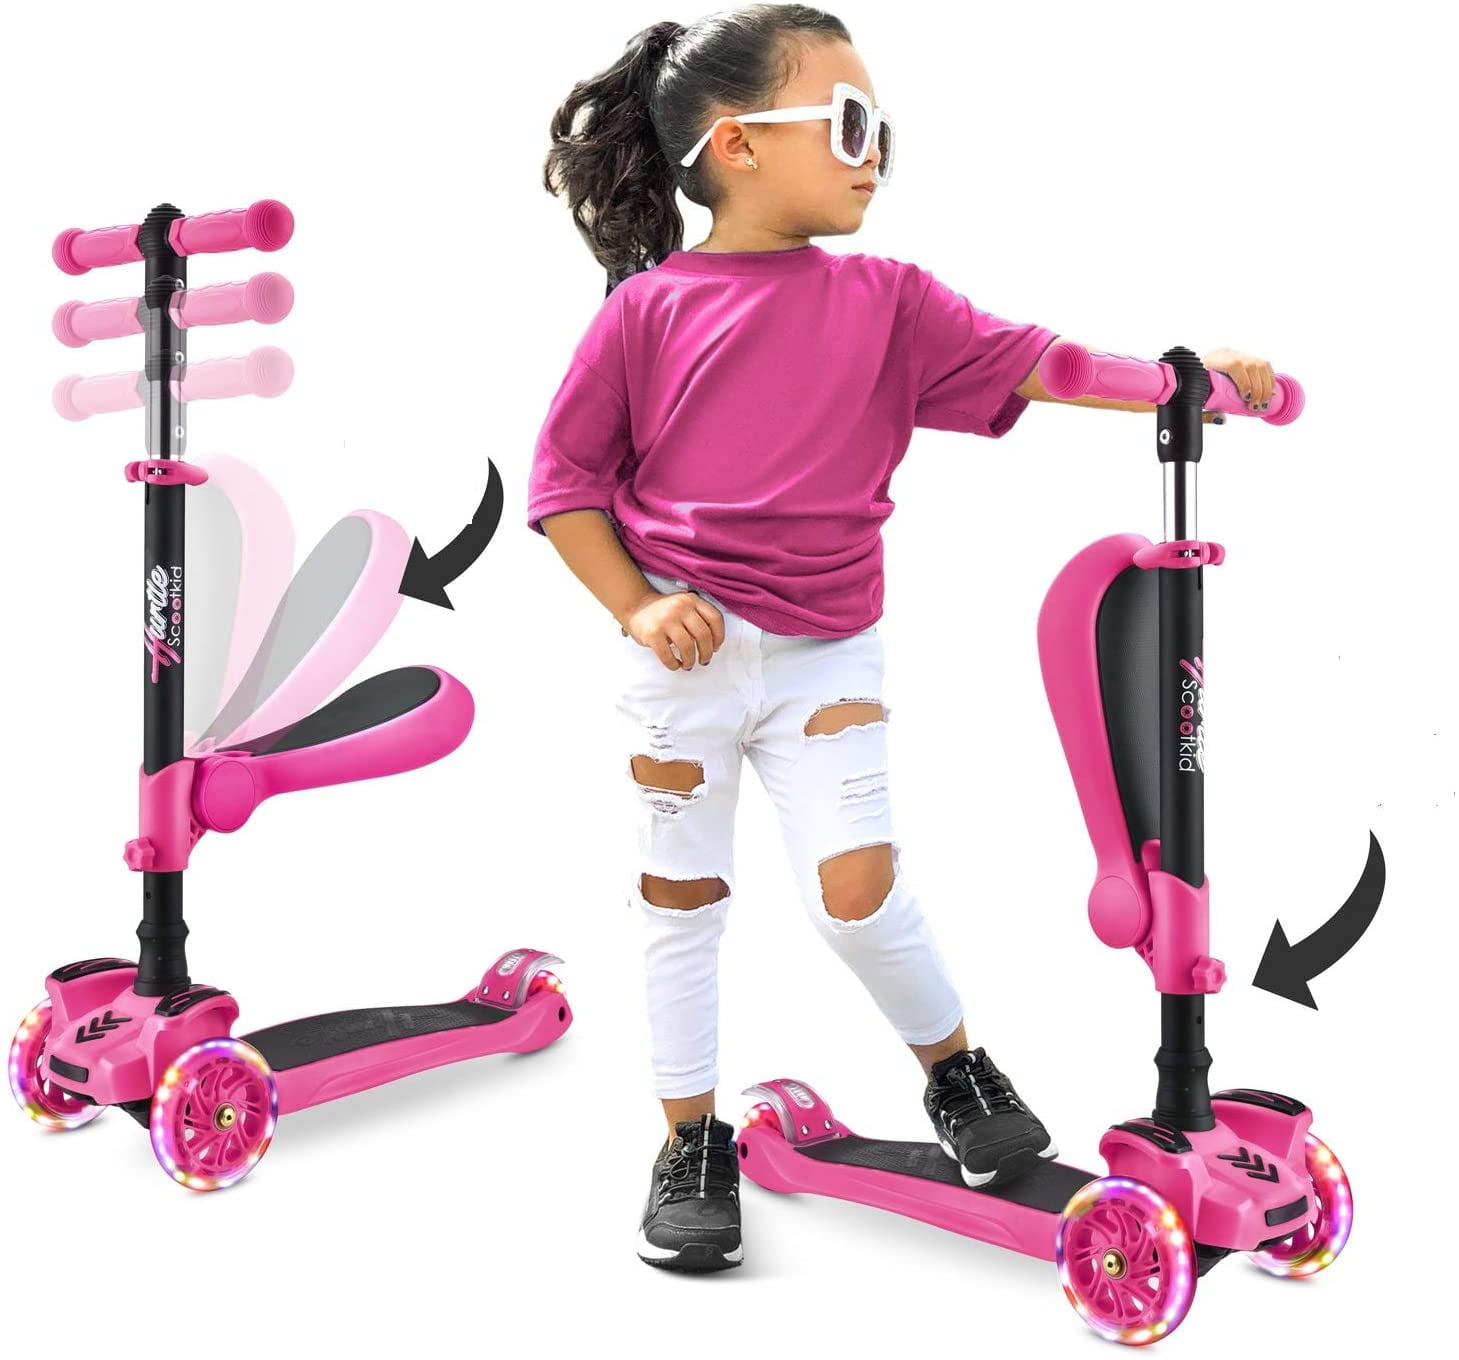 Scooters 2 Wheel Folding Kick Scooter for Adults Teens Youths Boys Girls Green 